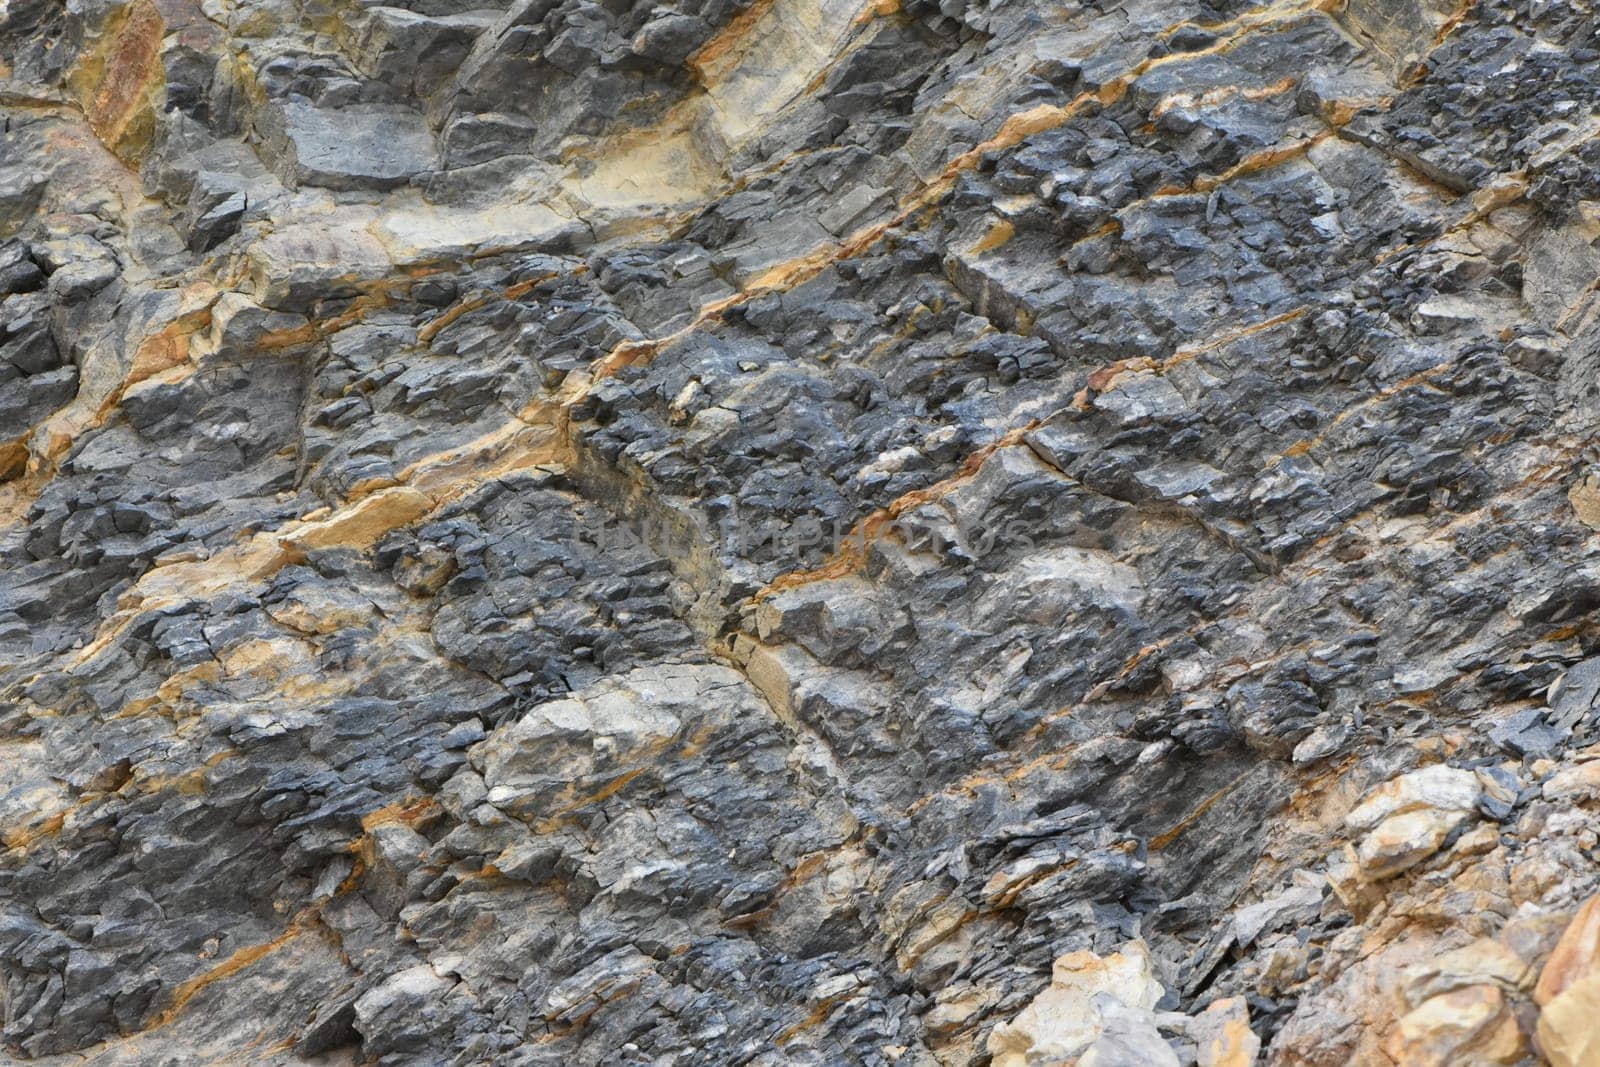 Geology Photo - Layers of Rock near Boulder Colorado. High quality photo